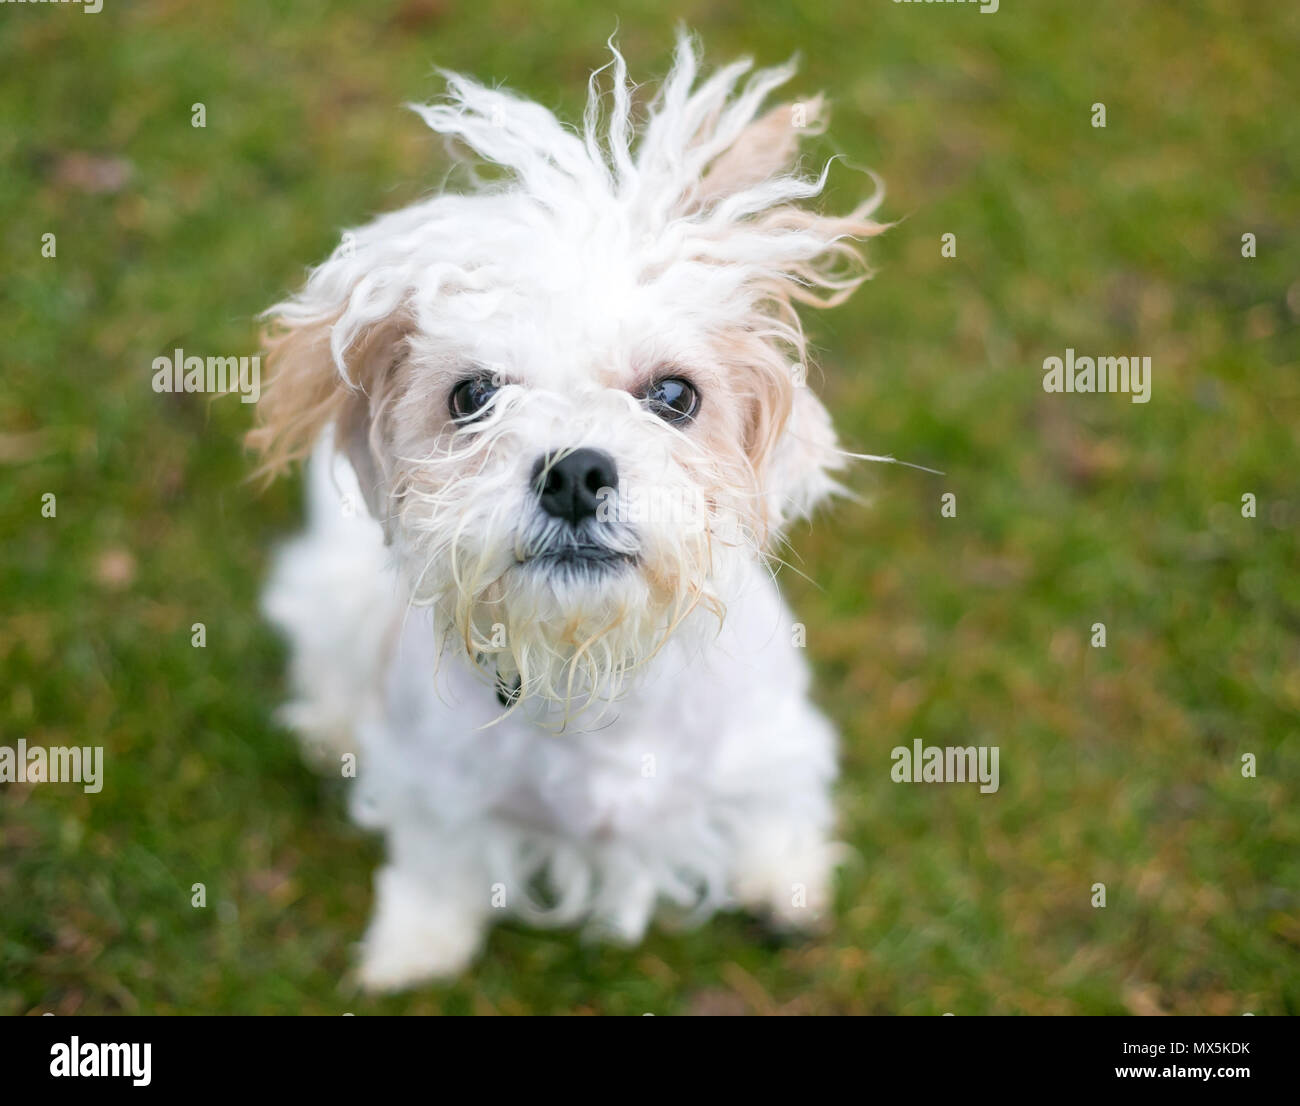 A small mixed breed dog having a bad hair day with frizzy, windblown fur Stock Photo